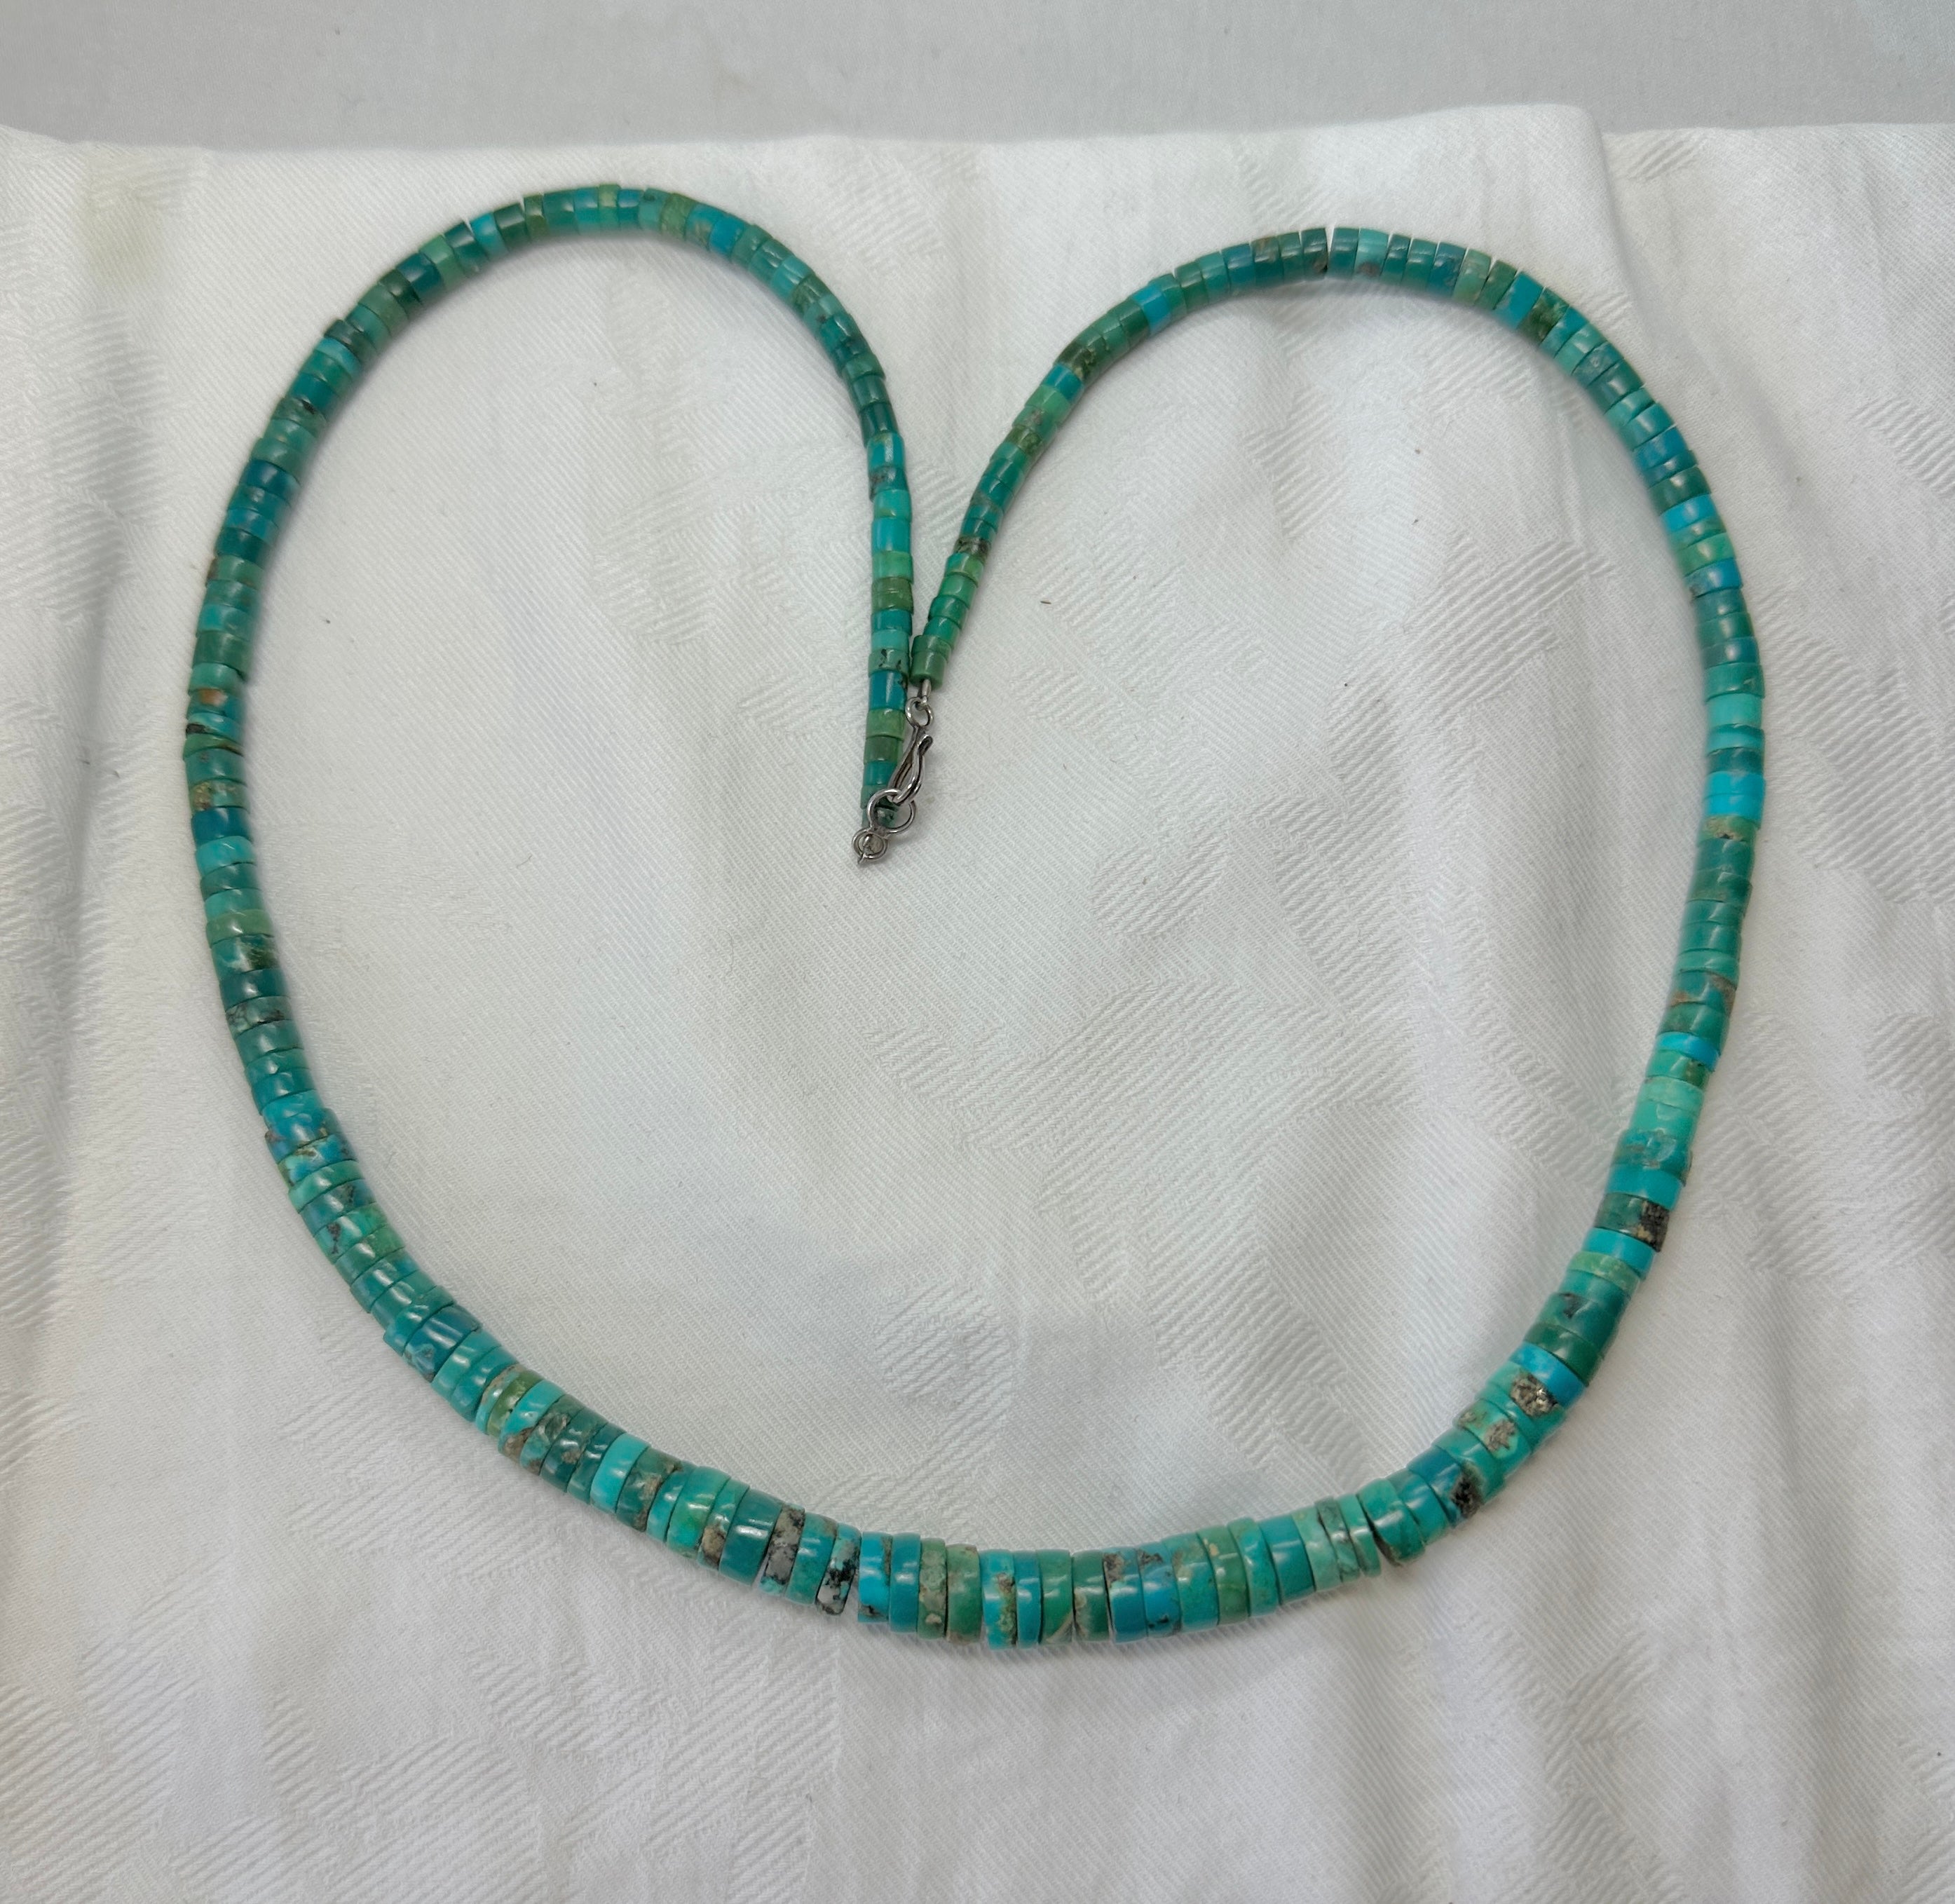 Women's or Men's Early Santo Domingo Pueblo Greasy Caribbean Blue Green Heishi Turquoise Necklace For Sale